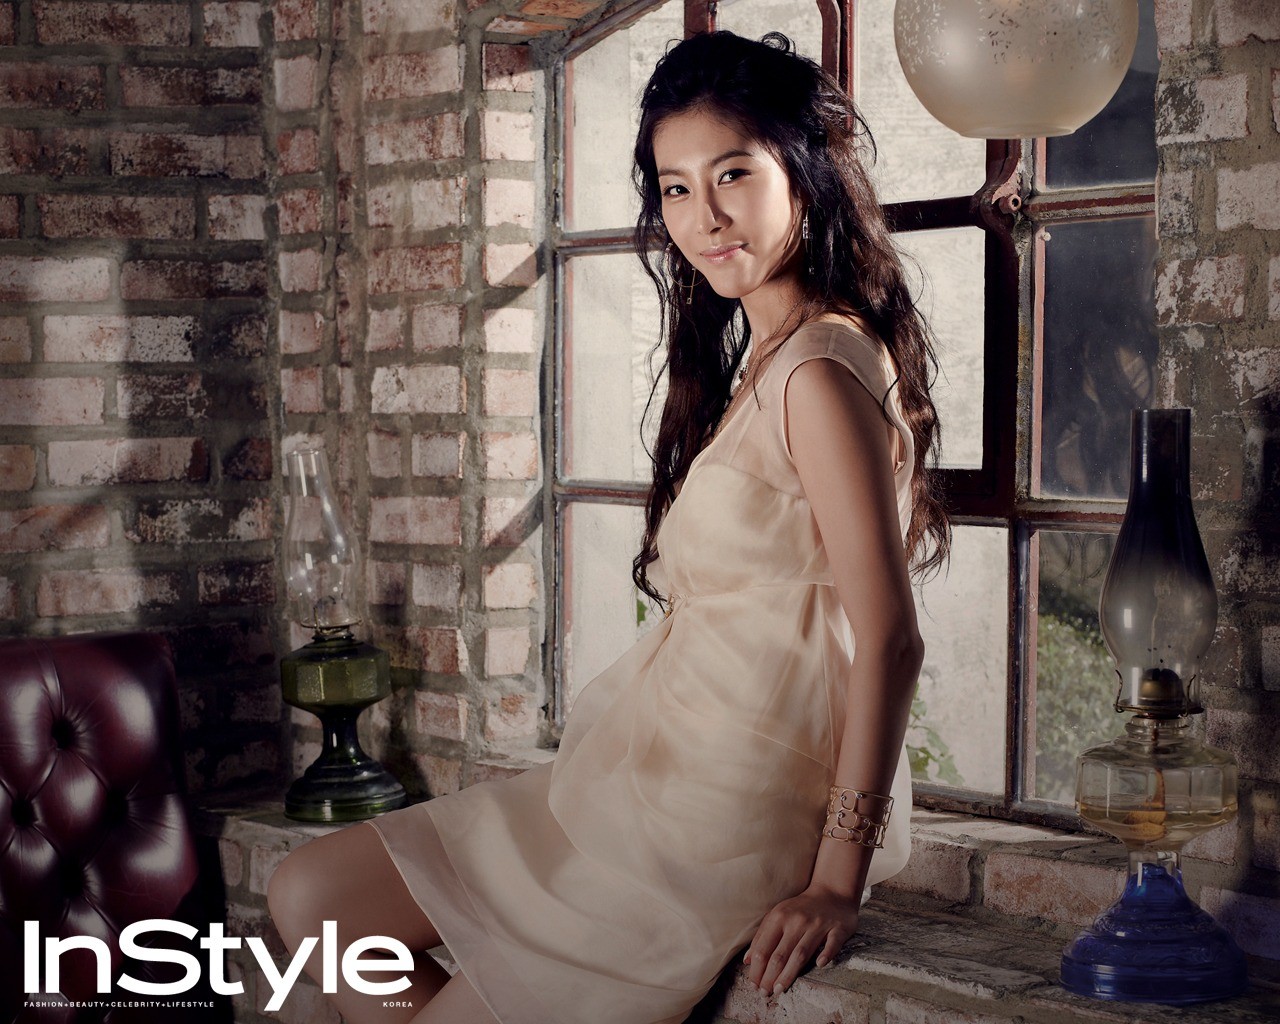 South Korea Instyle Cover Model #32 - 1280x1024